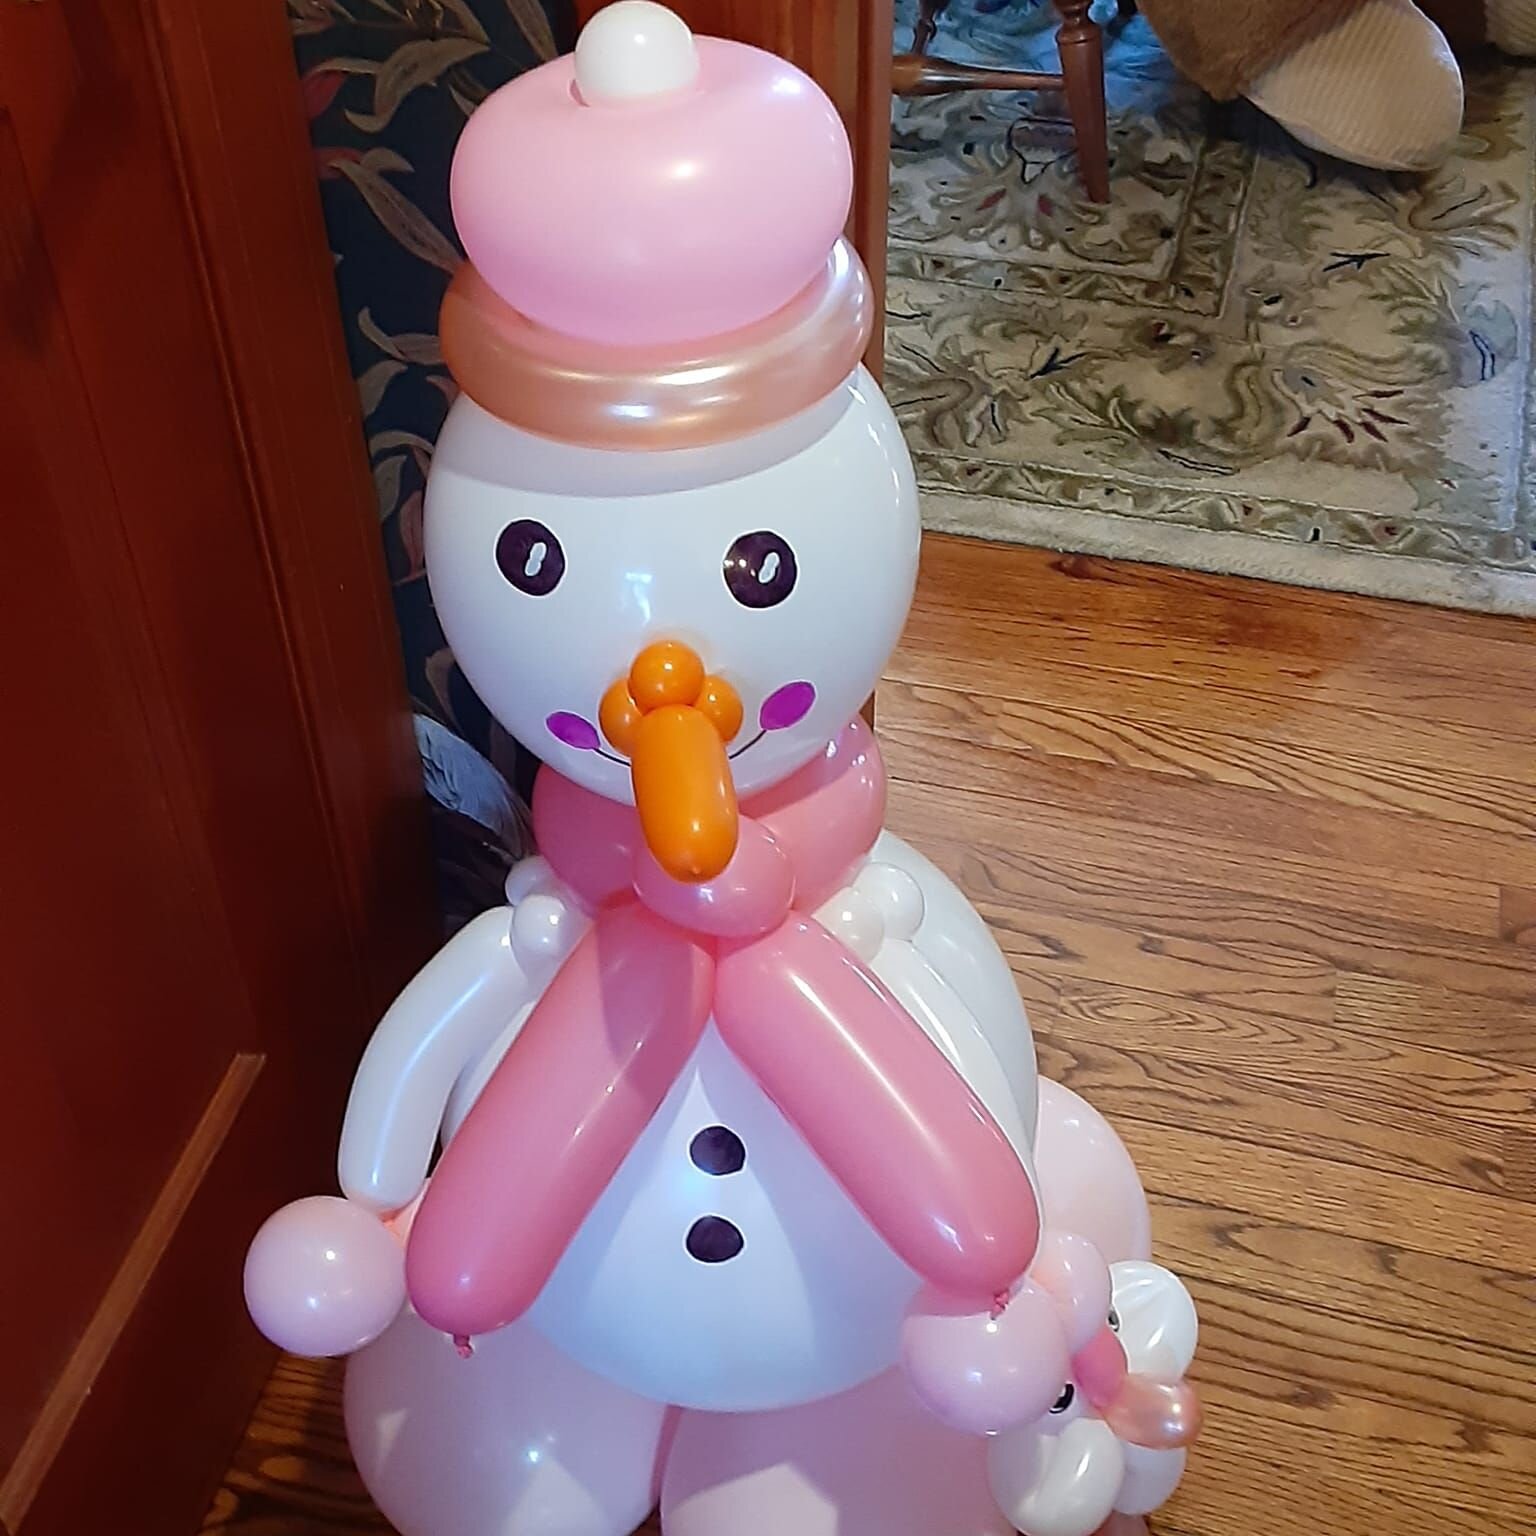 SATURDAY SCHEDULE UPDATE! 

Unfortunately the Mt. Hope Holiday Musicafe at 3:30 has been cancelled, but there will be Balloon Animals by Ceil outside of Savon Shoes at 1:30 PM.

ADDED:

1:30 
Balloons by Ciel: Ciel will made a balloon of your choice.